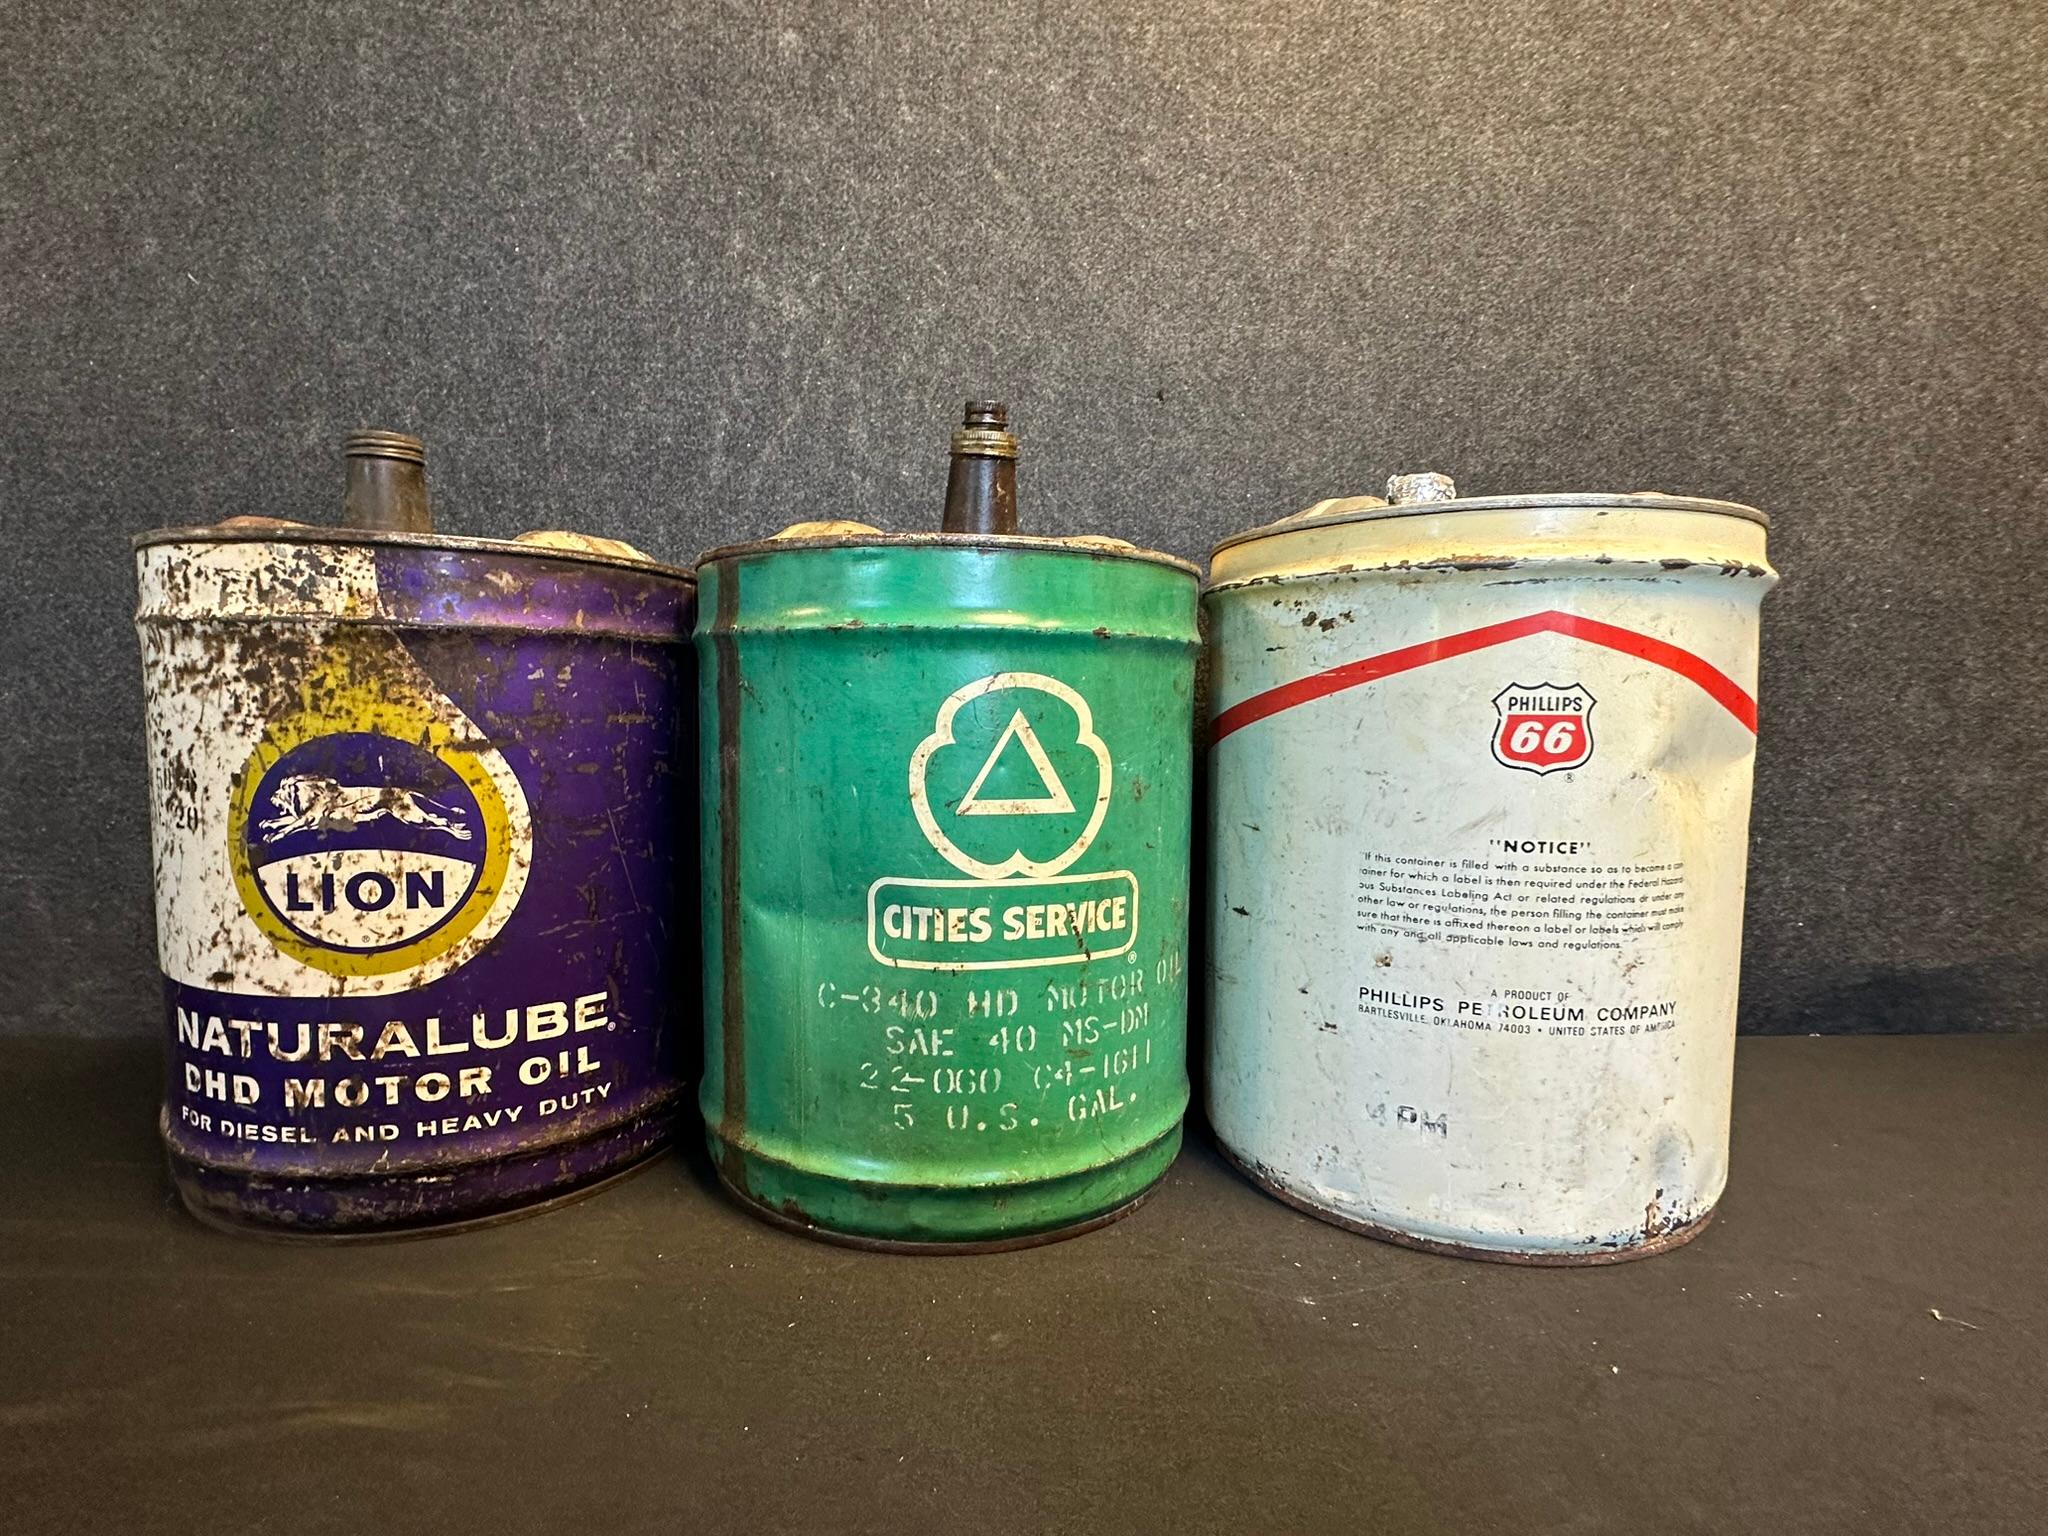 Lion Naturalube, Cities Service & Phillips 66 5 Gallon Motor Oil Can Lot